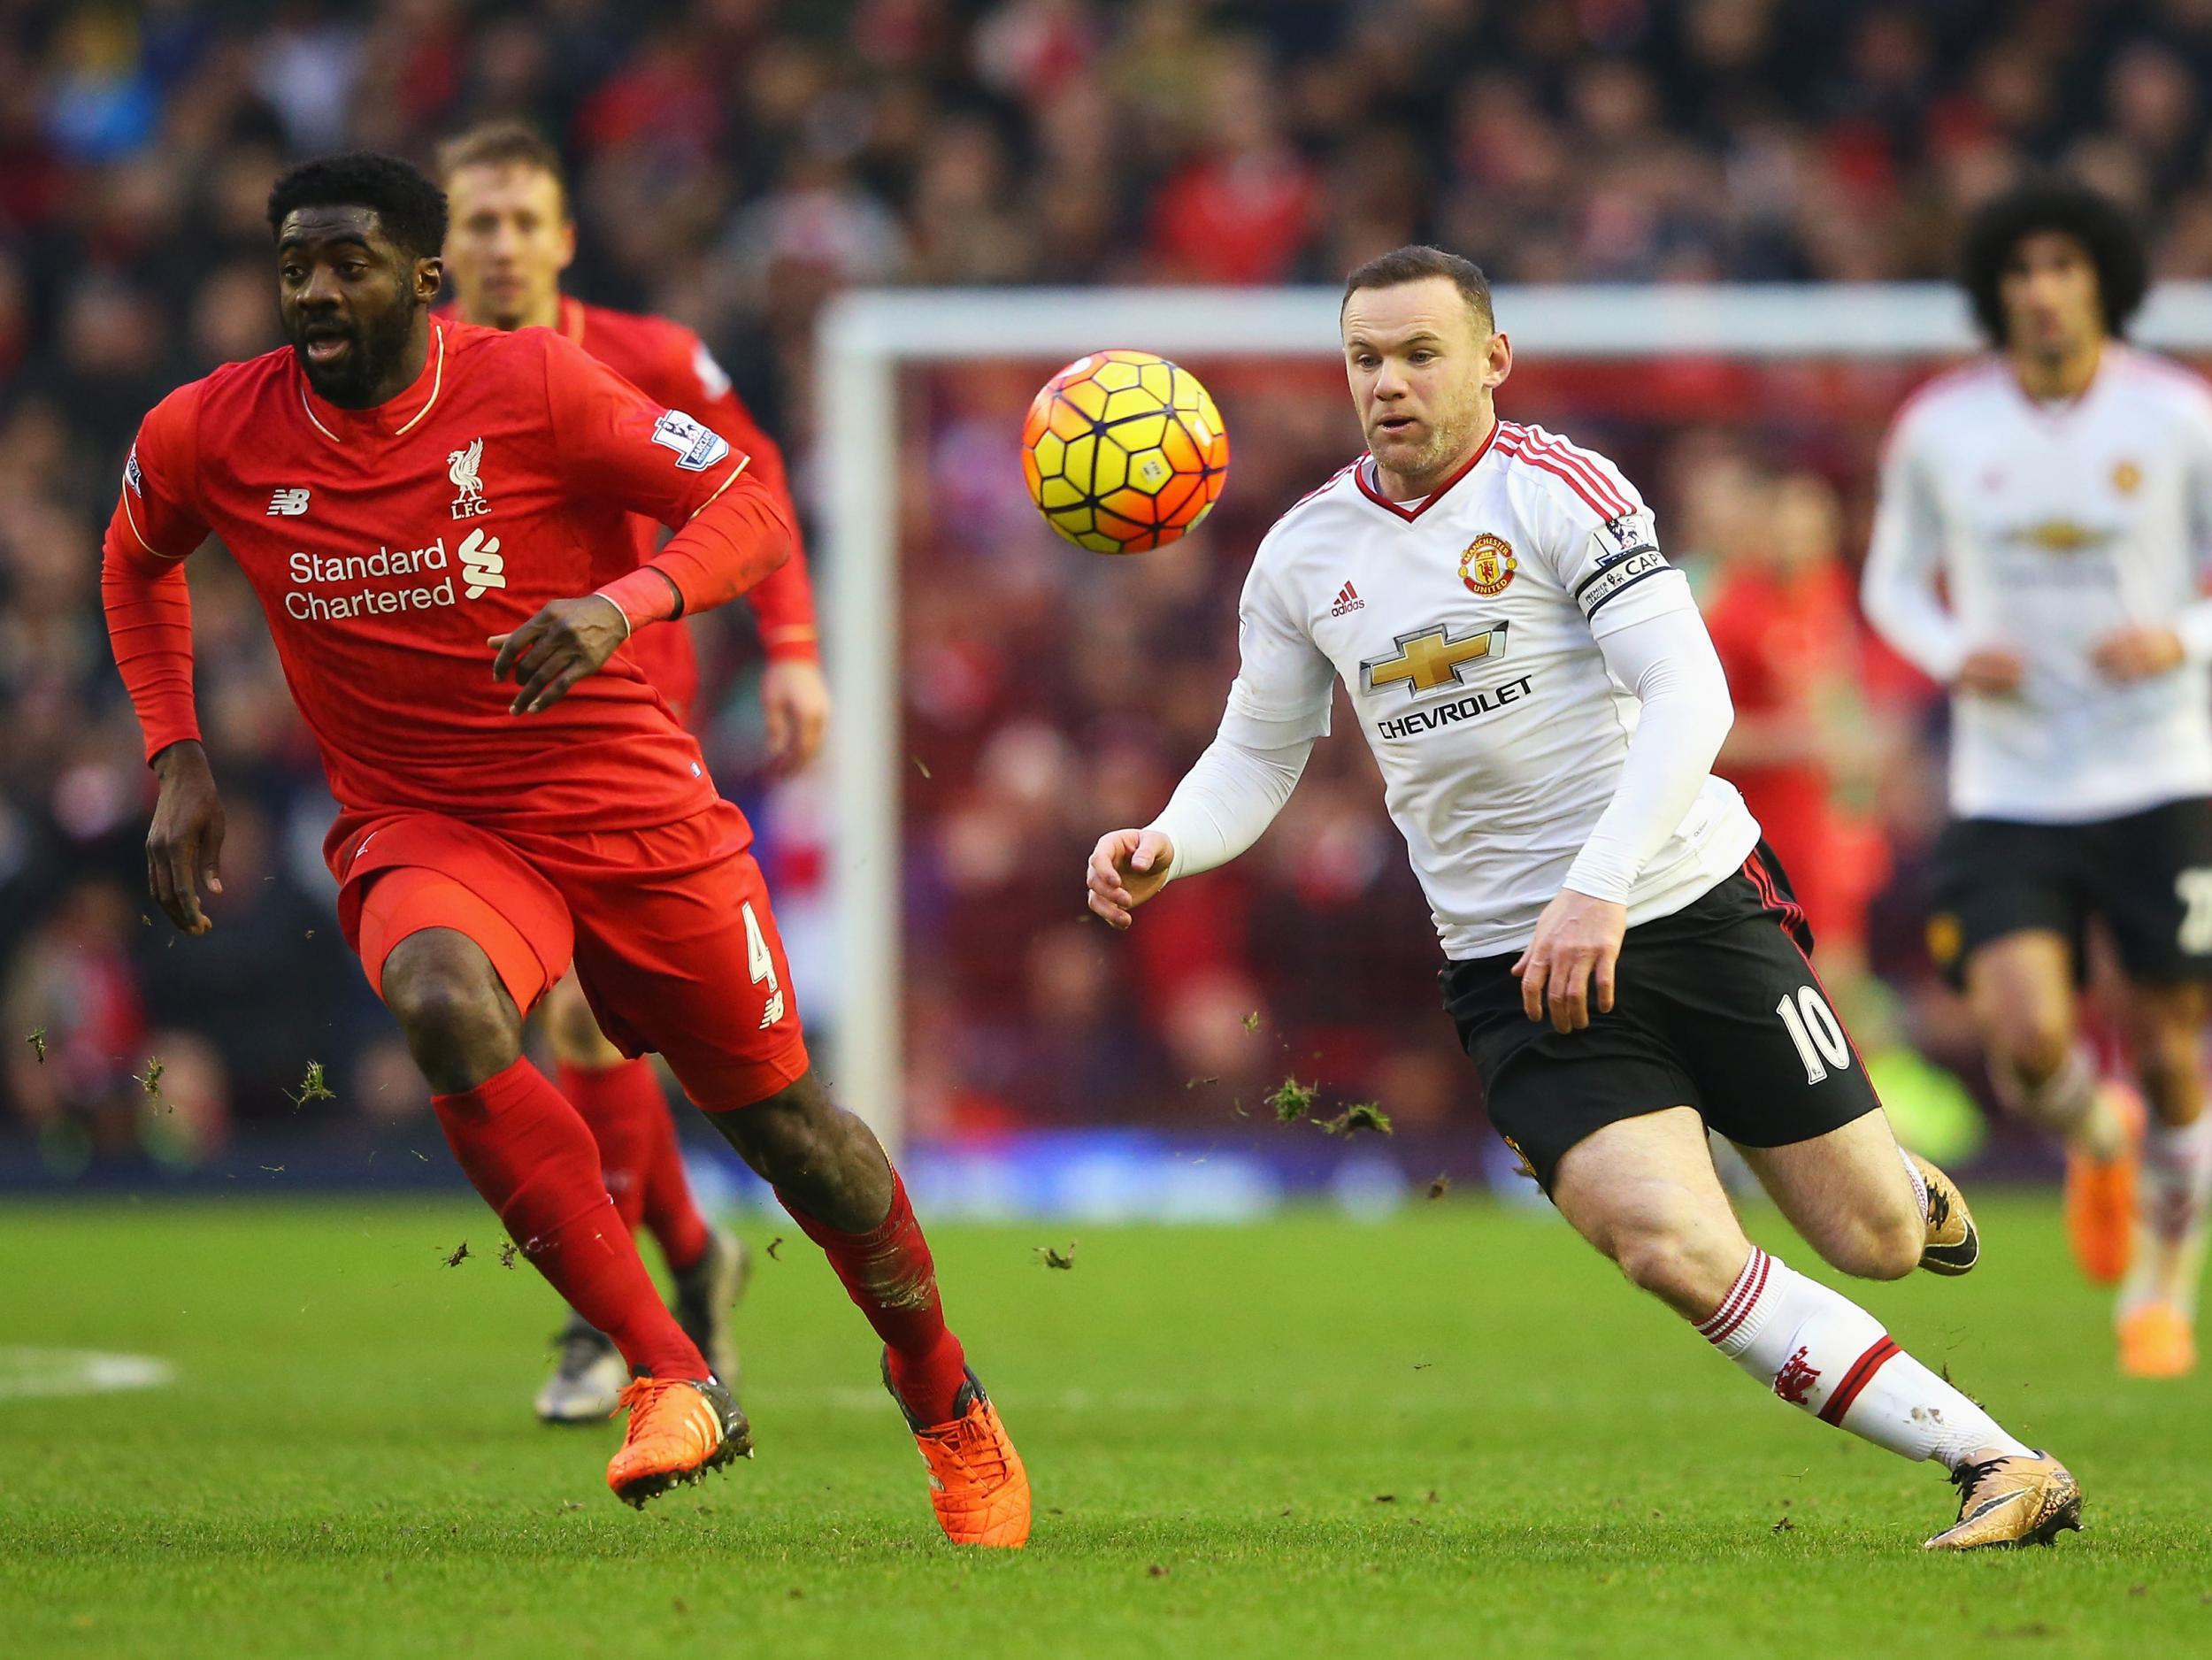 Rooney could break United's goalscoring record against Liverpool